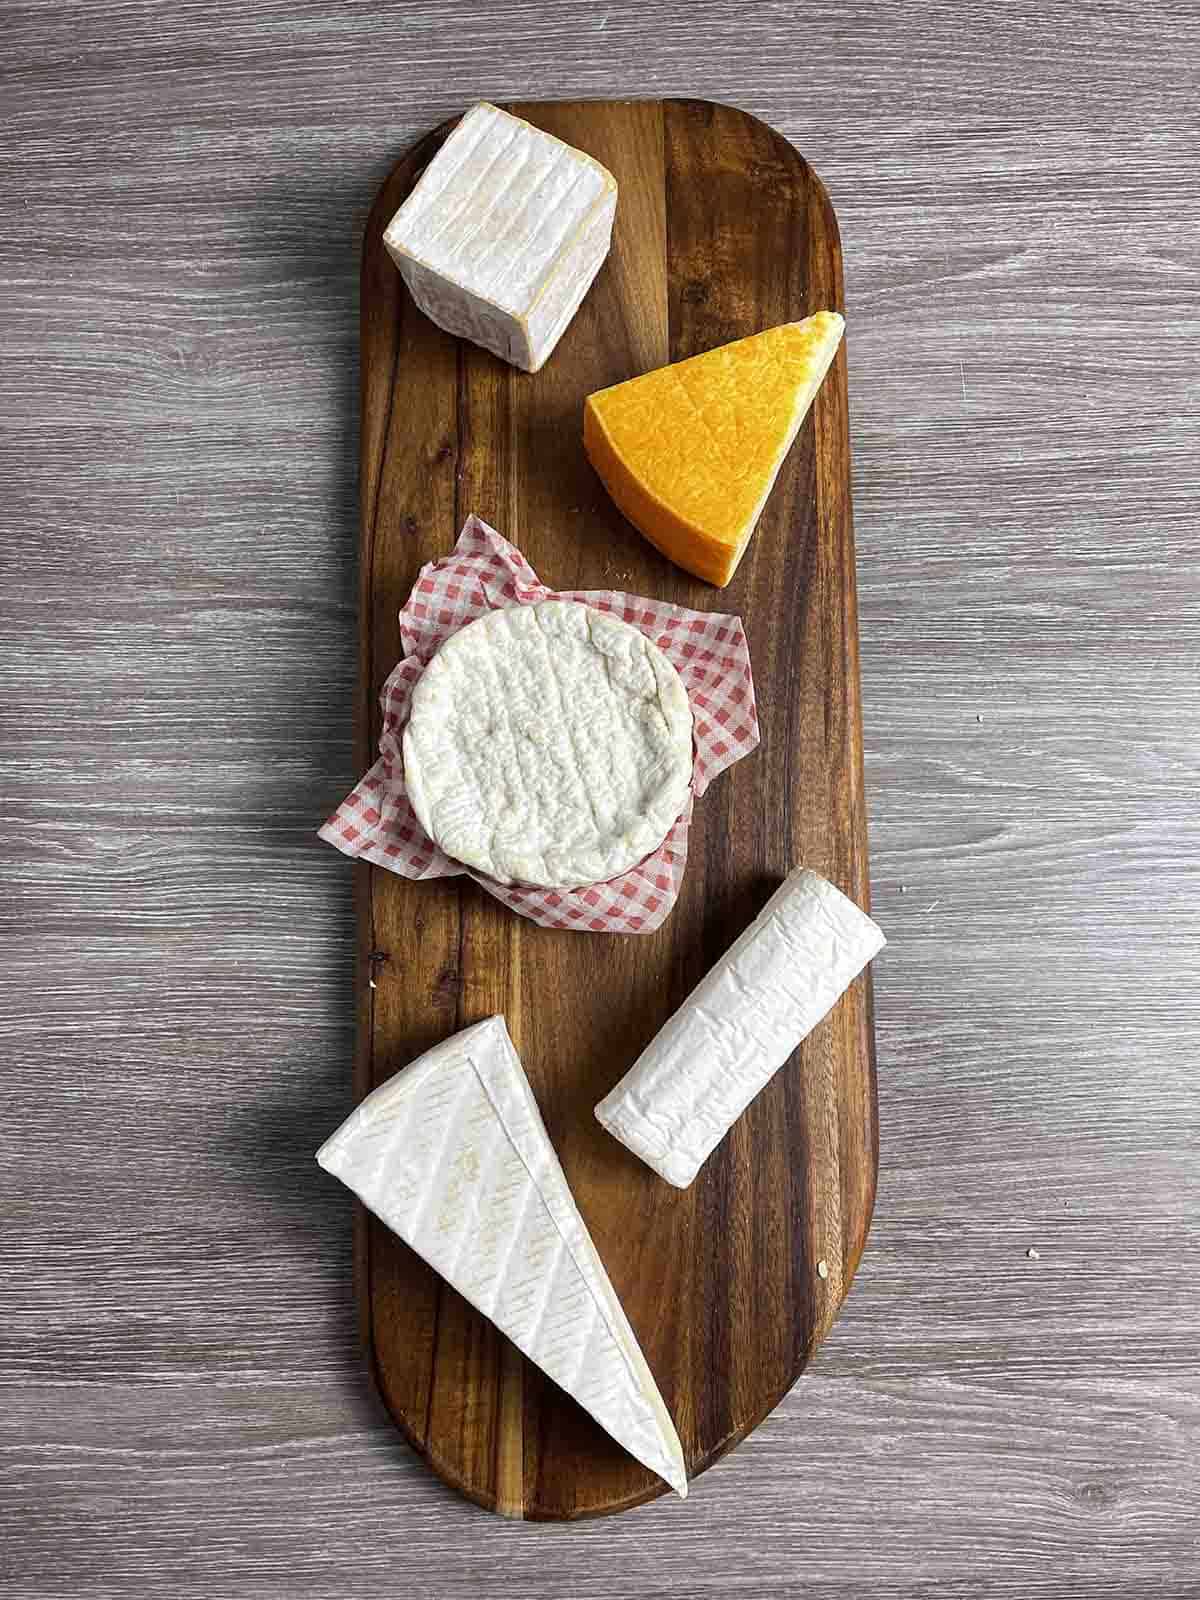 French cheeses on a board.